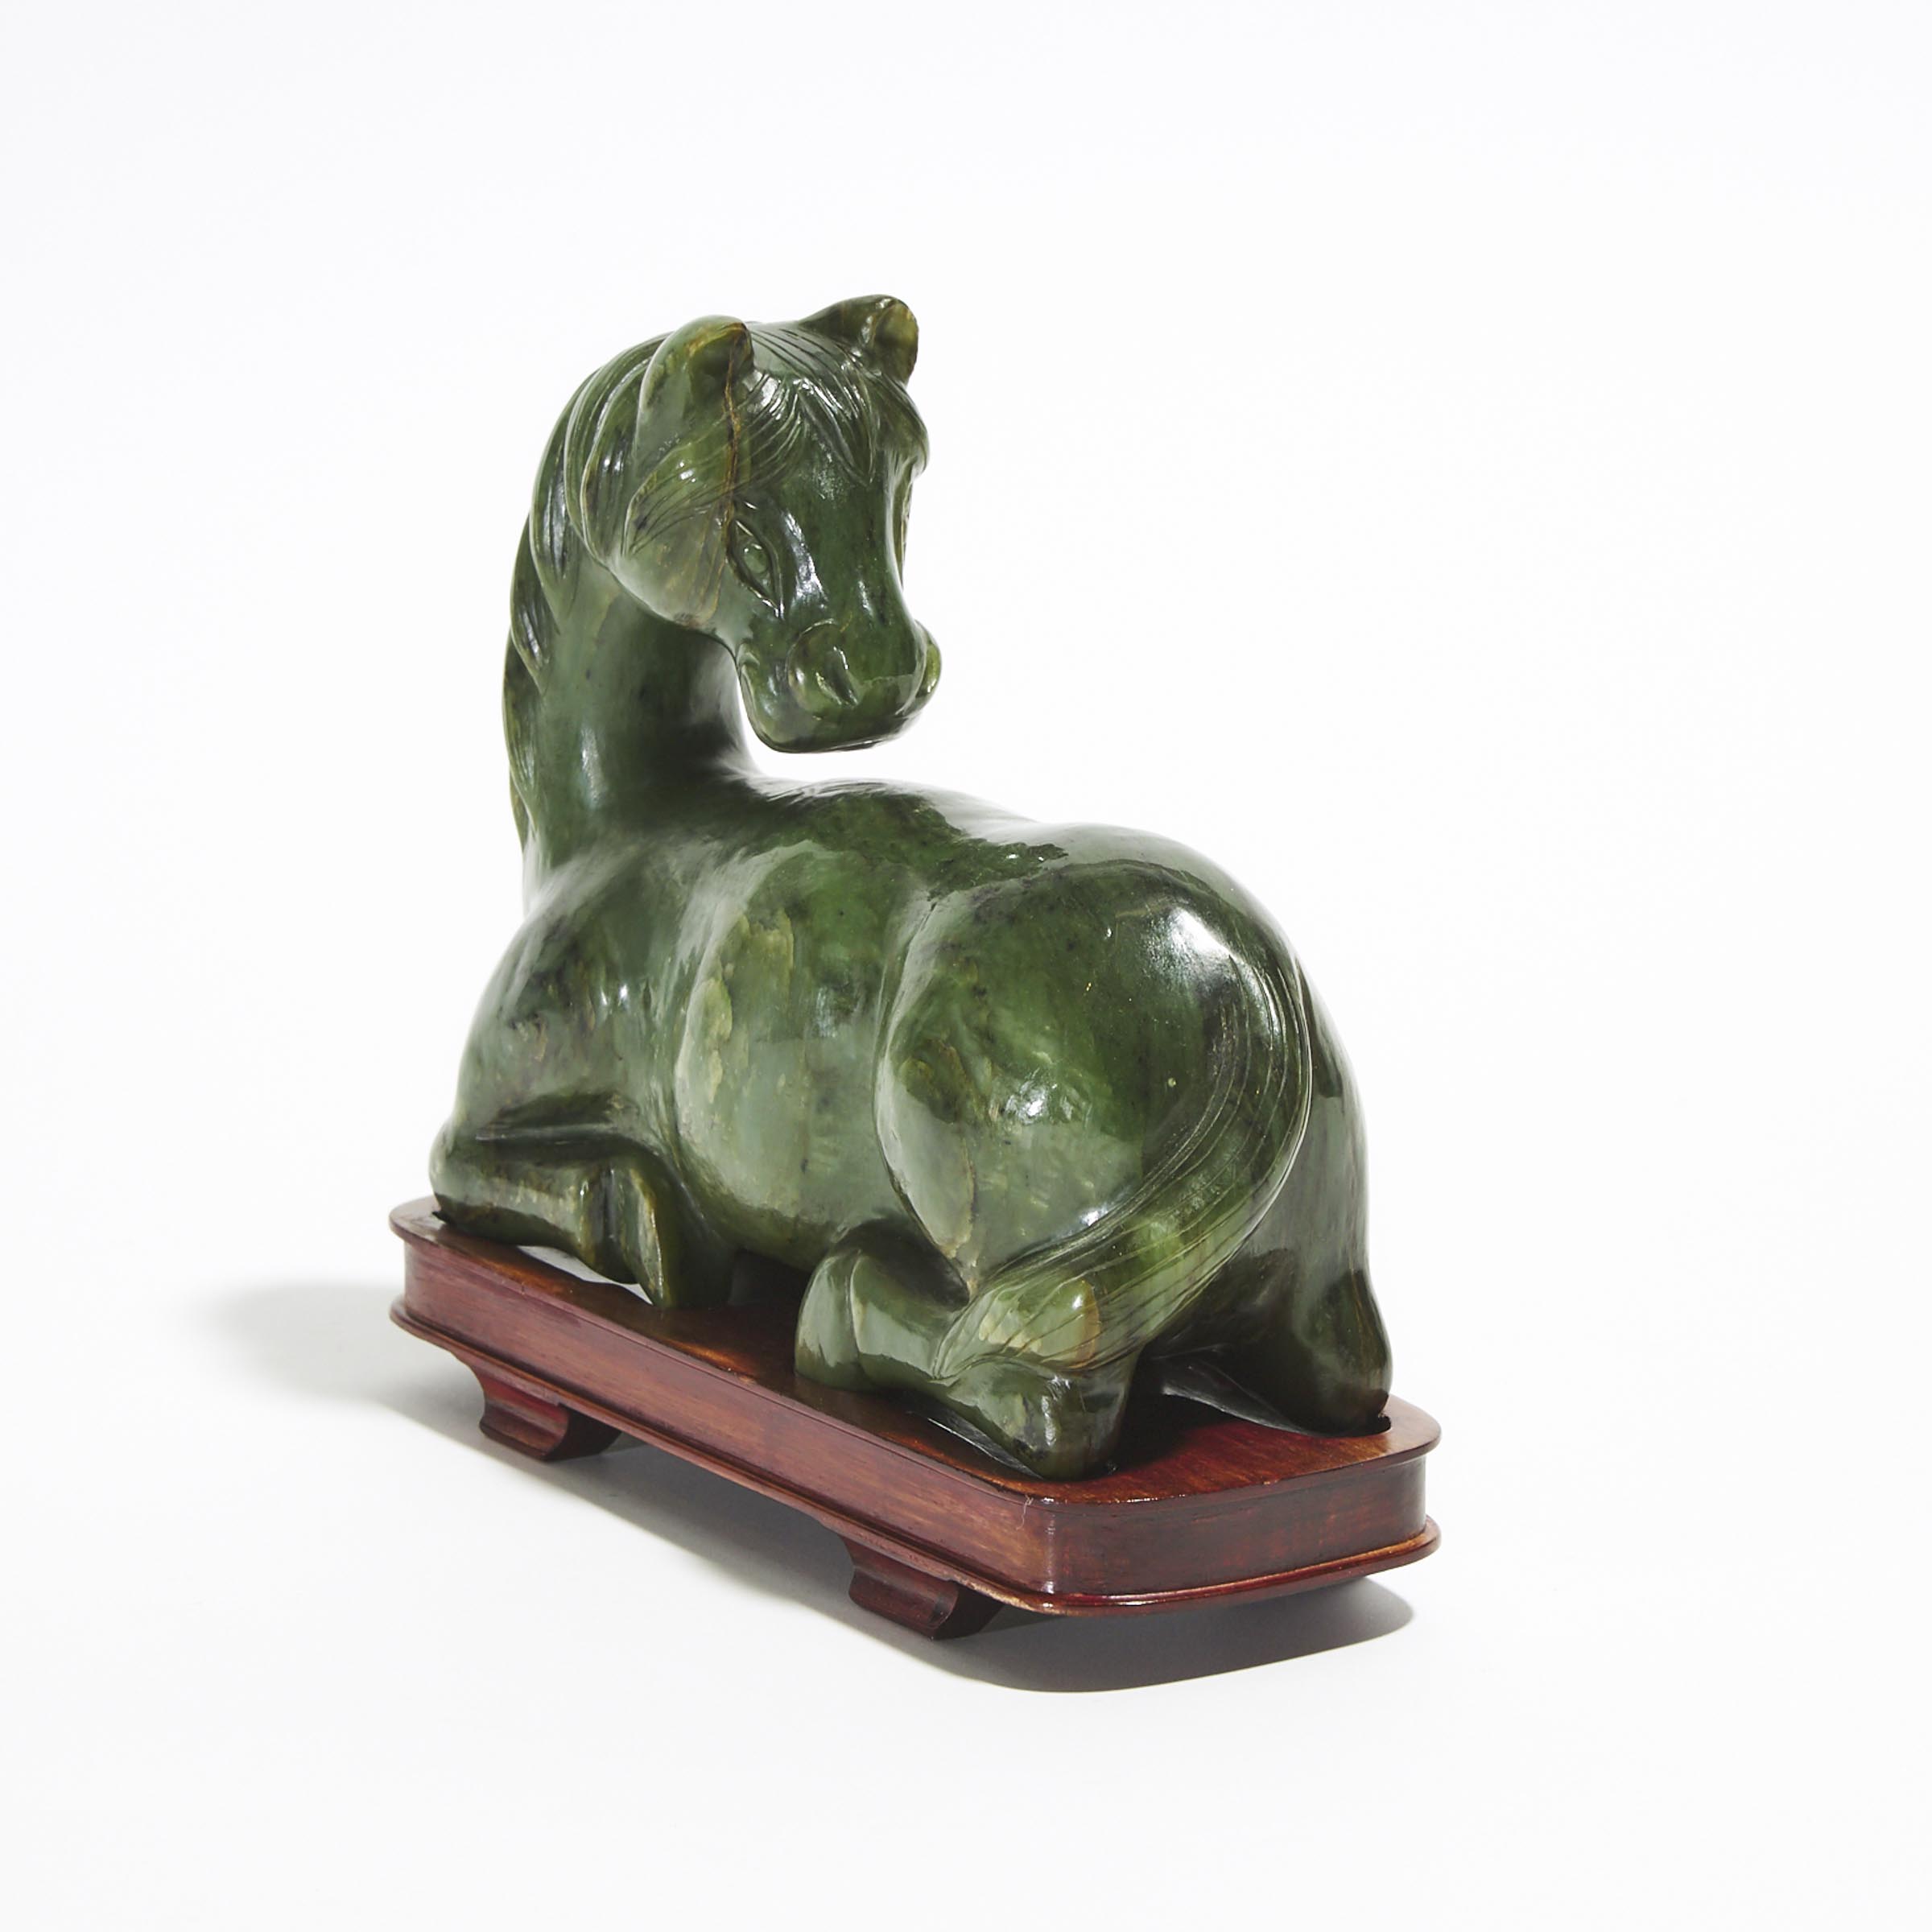 A Spinach Jade Carving of a Recumbent Horse 